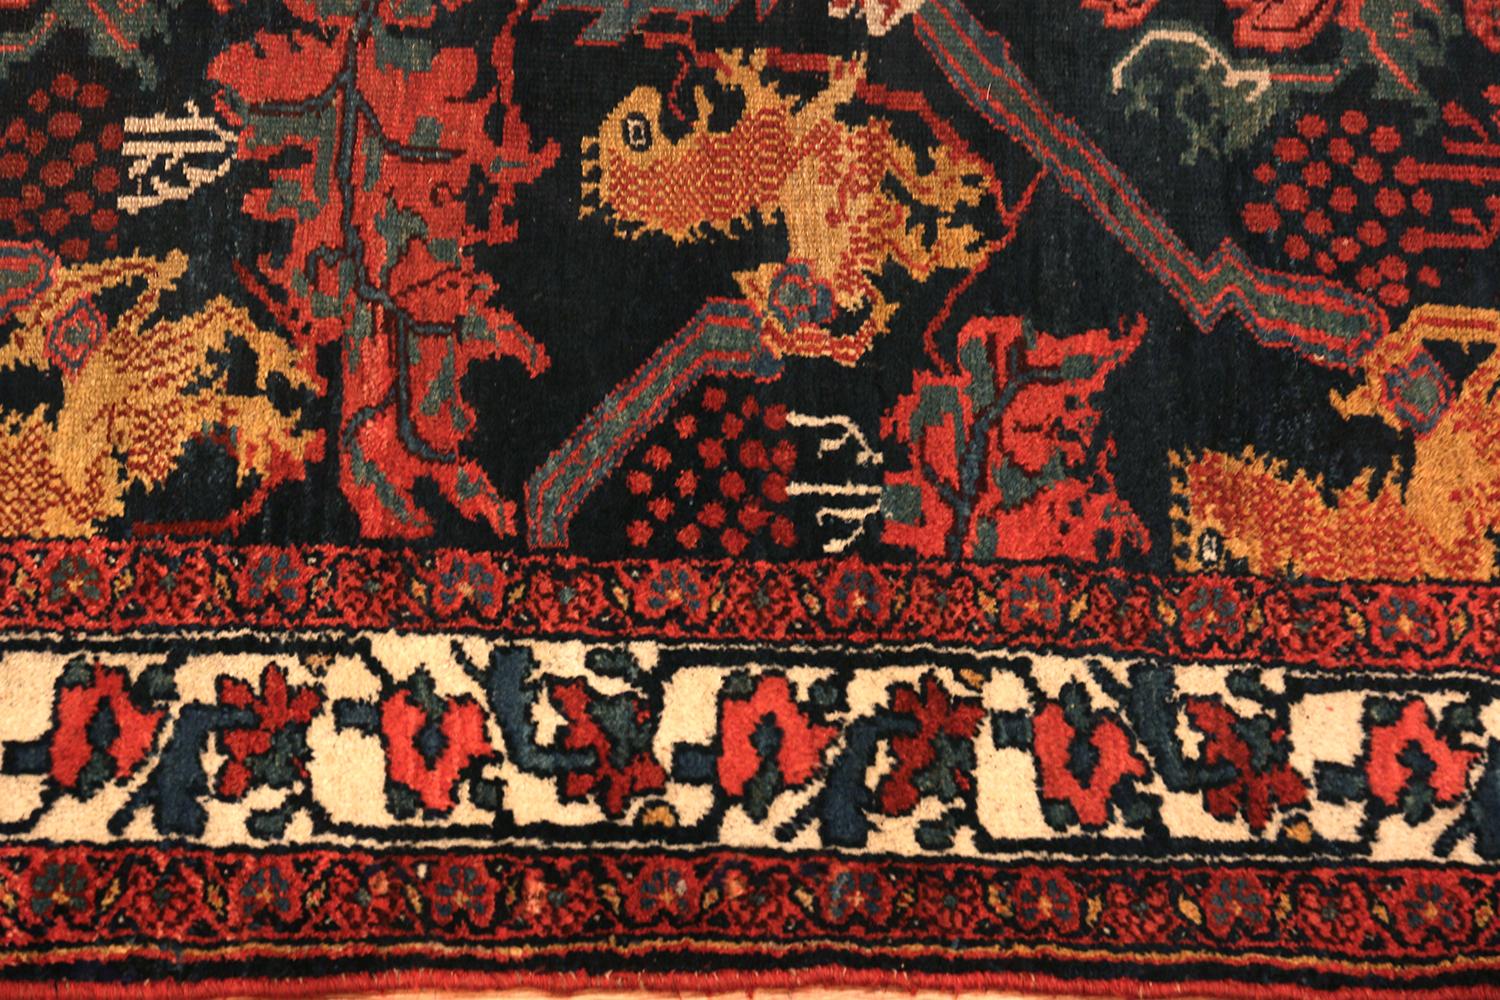 Beautiful antique Kurdish runner rug, country of origin / rug type: Persian rugs, circa 1900 - Size: 3 ft 7 in x 16 ft 2 in (1.09 m x 4.93 m). 

The rugs of the Kurdish people of Bidjar are known for their vibrant colors and range of traditional